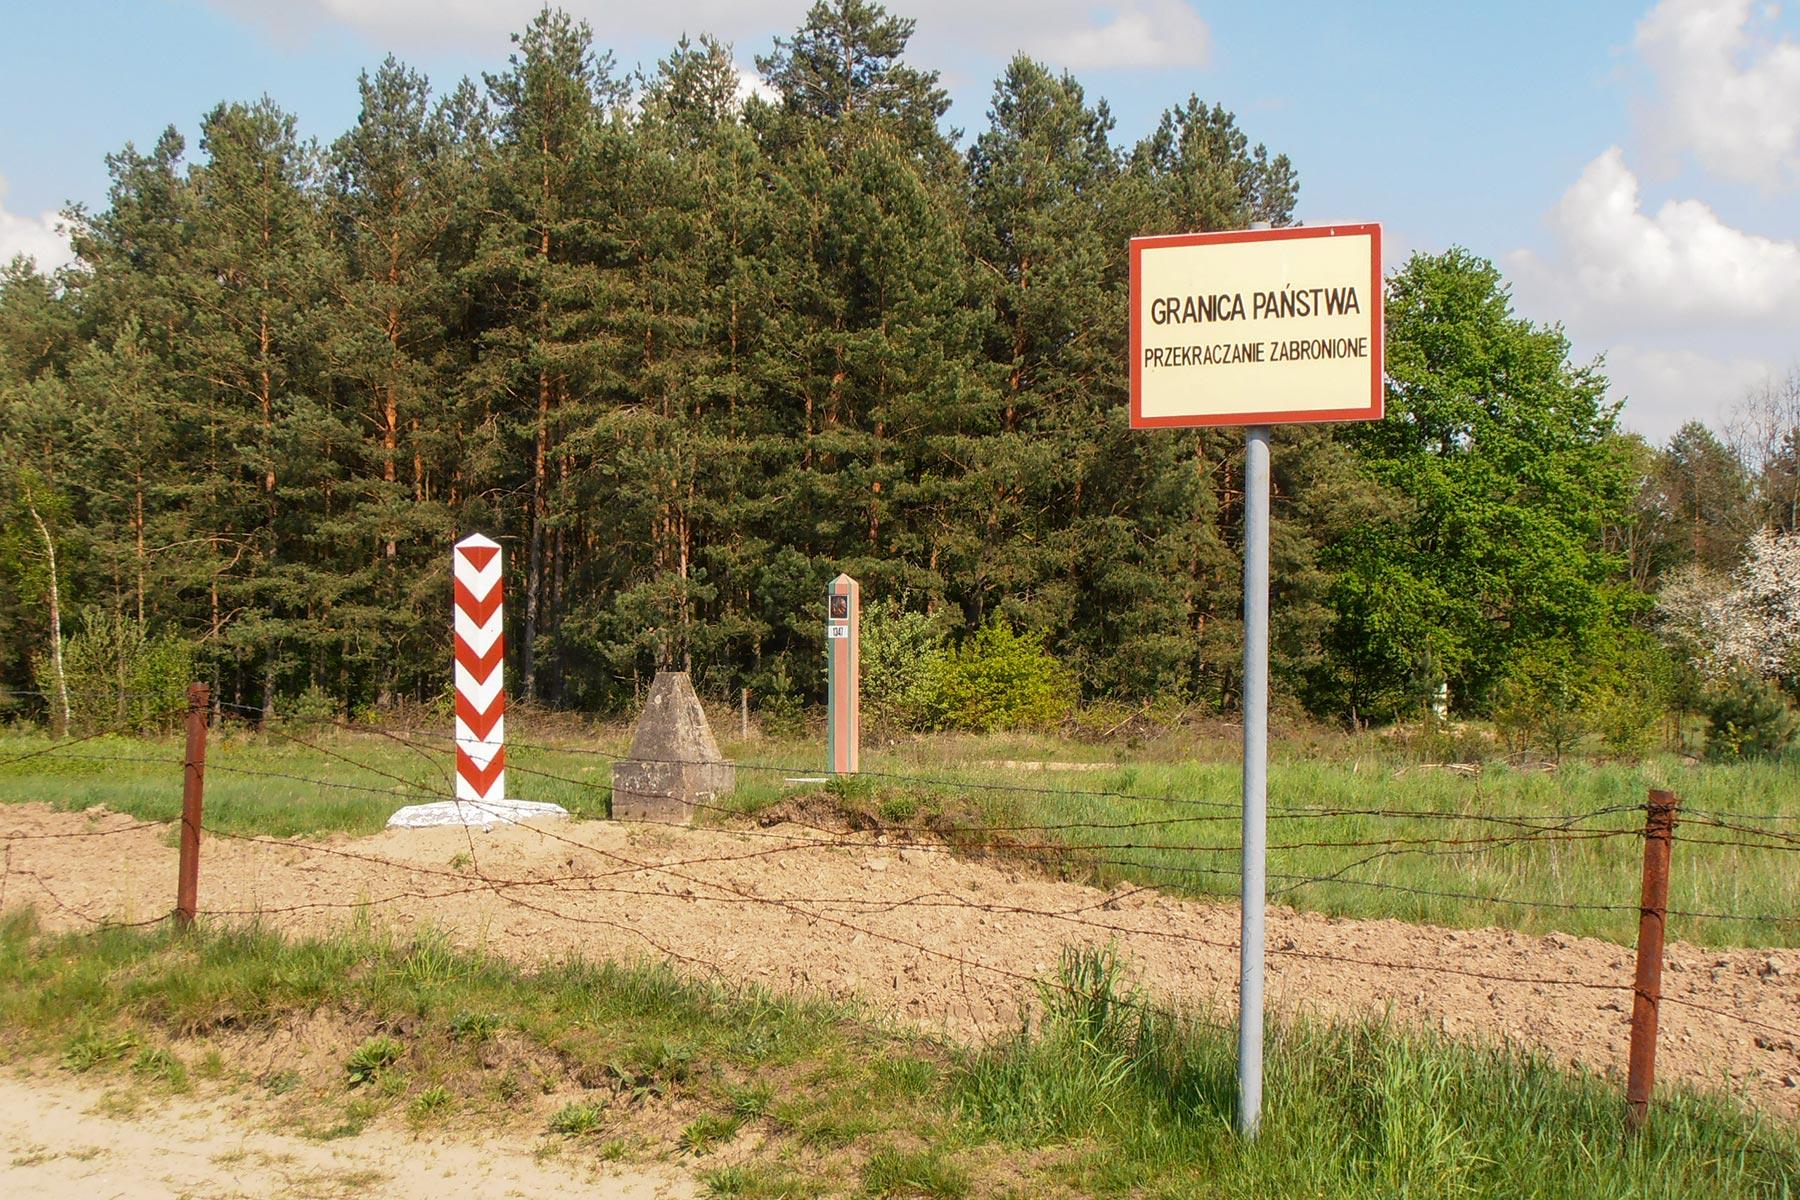 Lack of access to humanitarian assistance for the asylum seekers at the Belarus-Poland border is a major concern. Photo: Grzegorz W. TÄÅ¼ycki via Wikimedia Commons (CC-BY-SA)